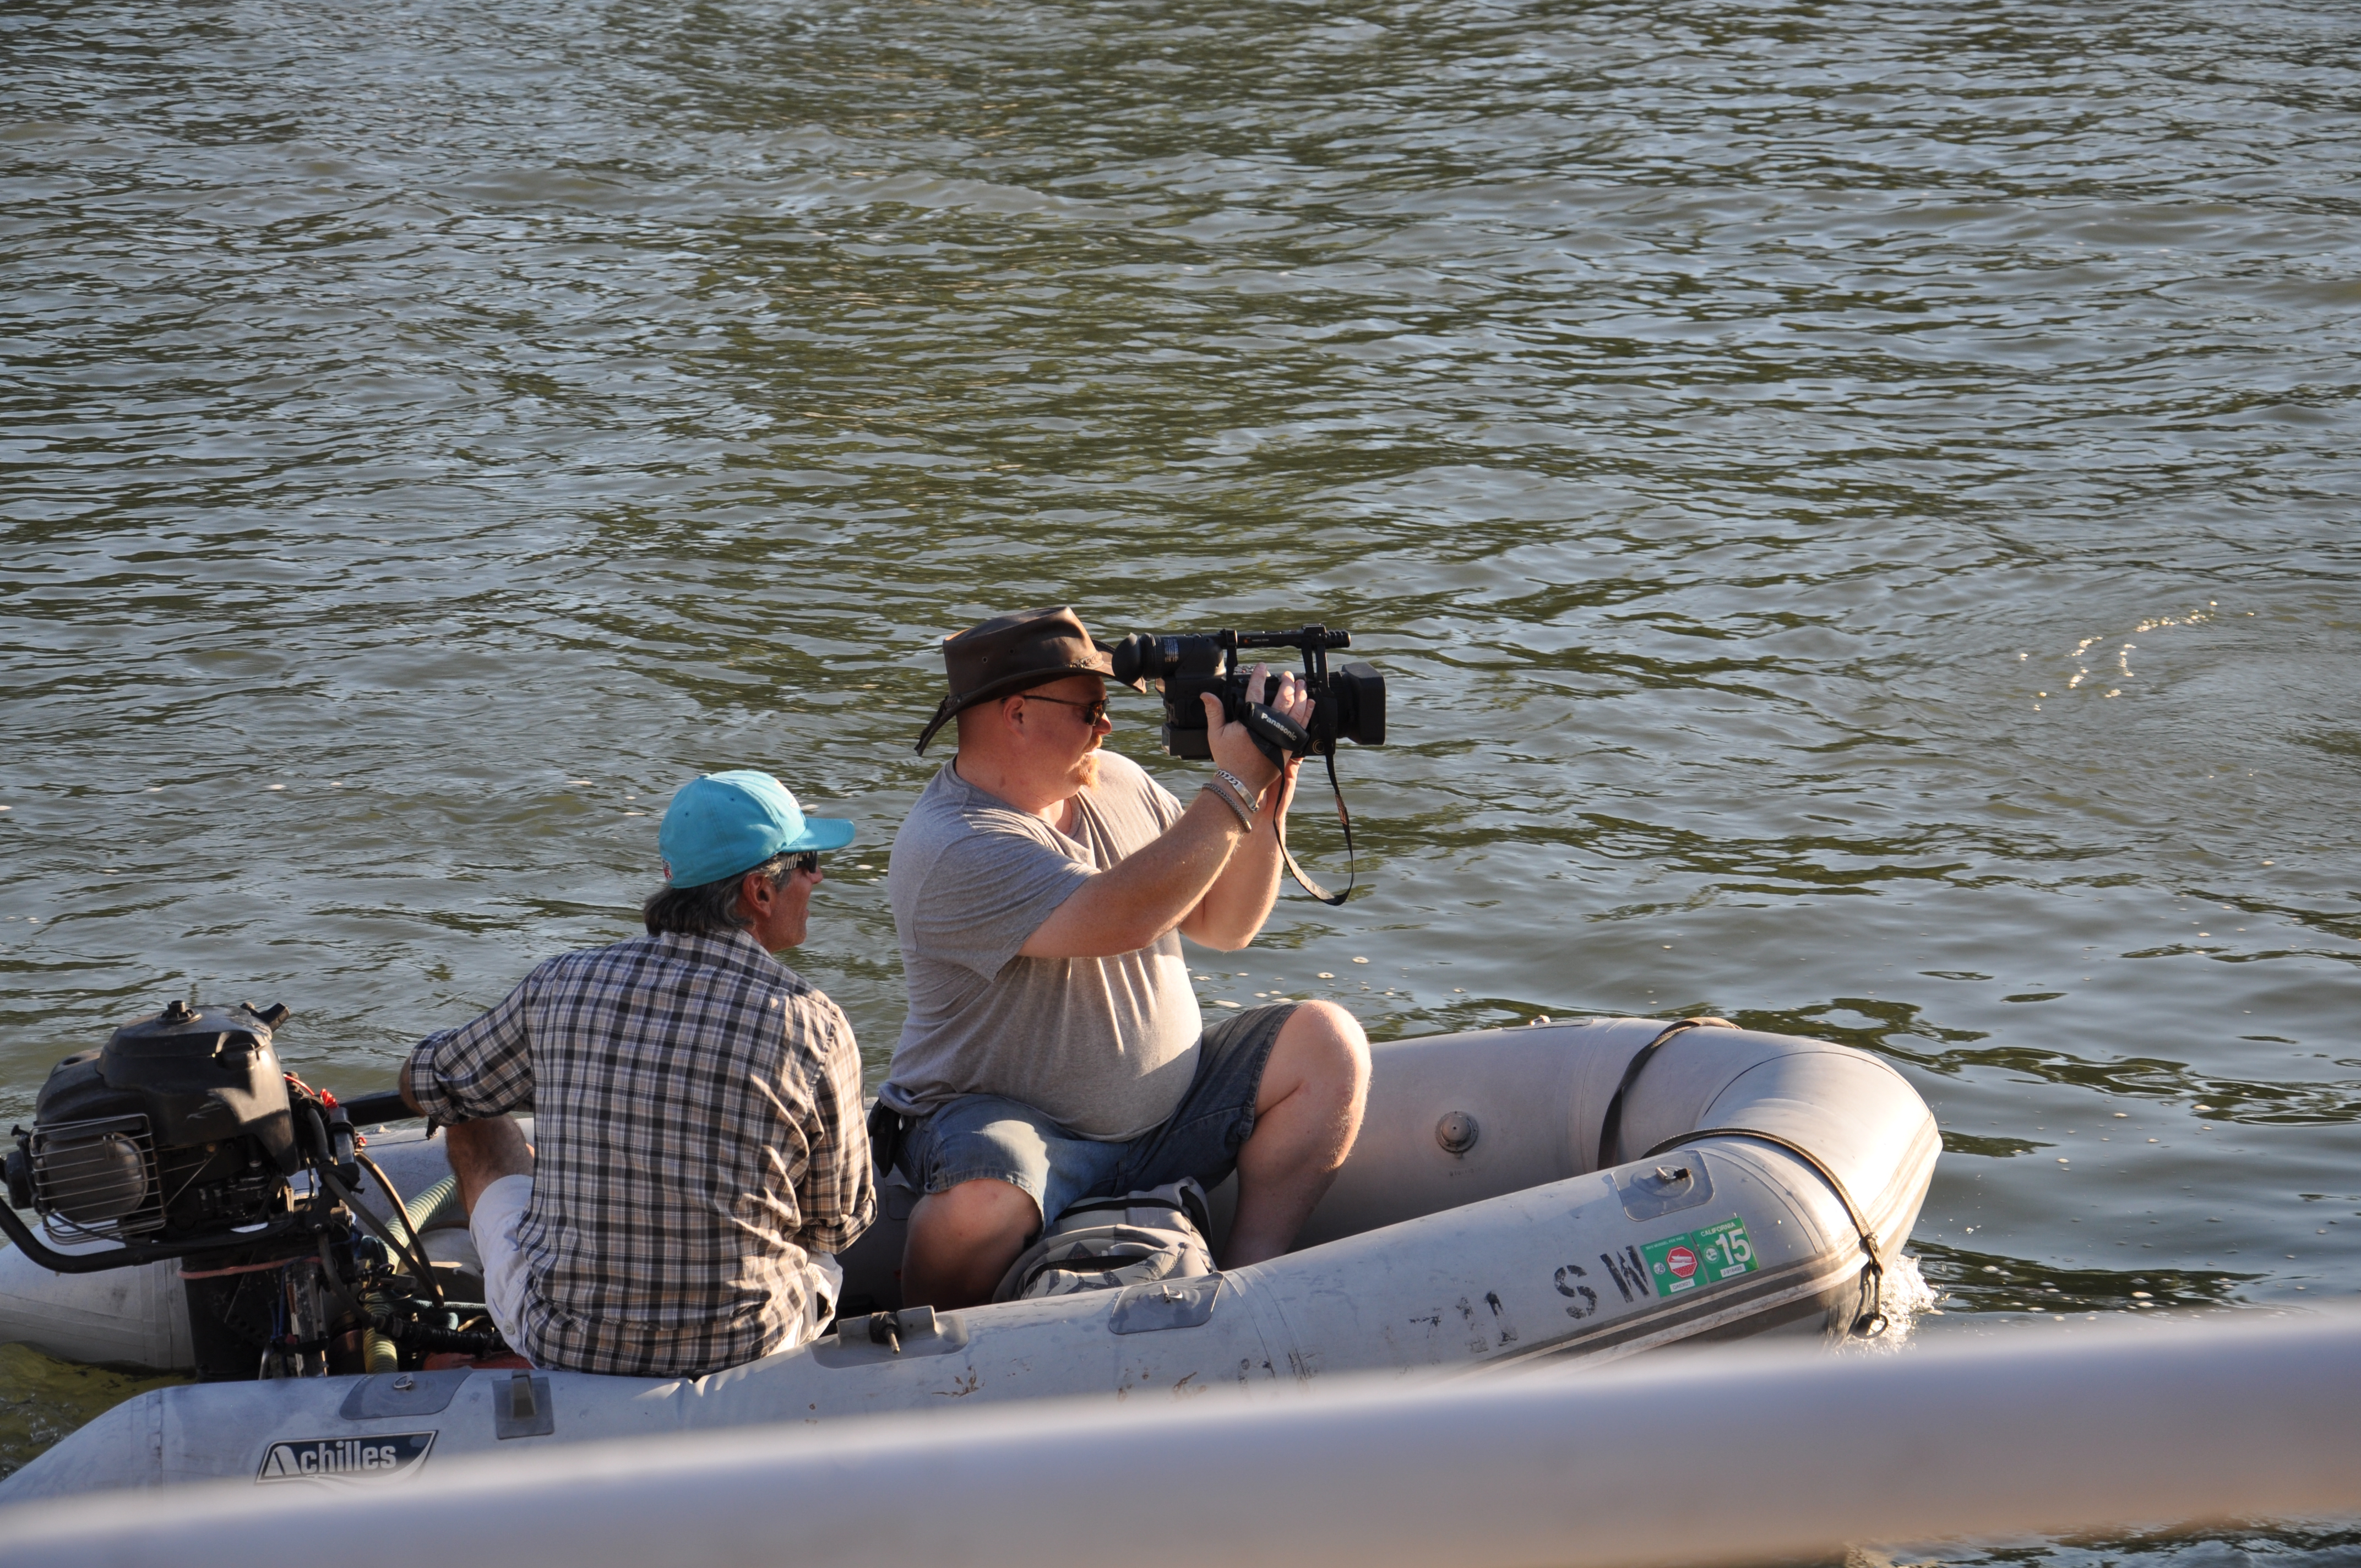 filming ON the river. Camera boat.